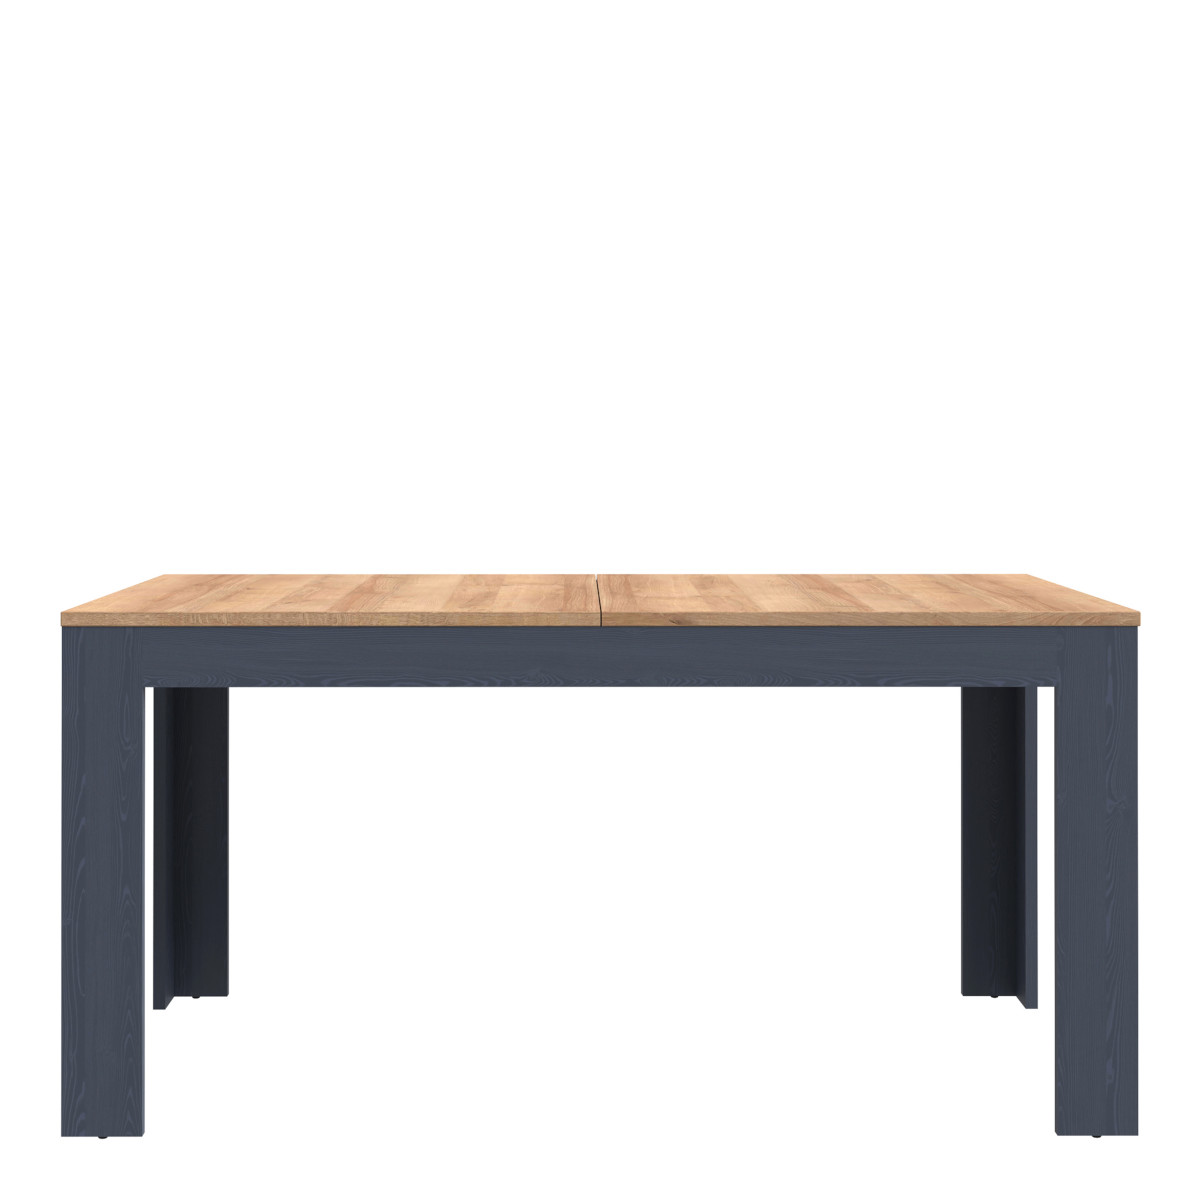 Bohol Extending Dining Table in Riviera Oak and Navy